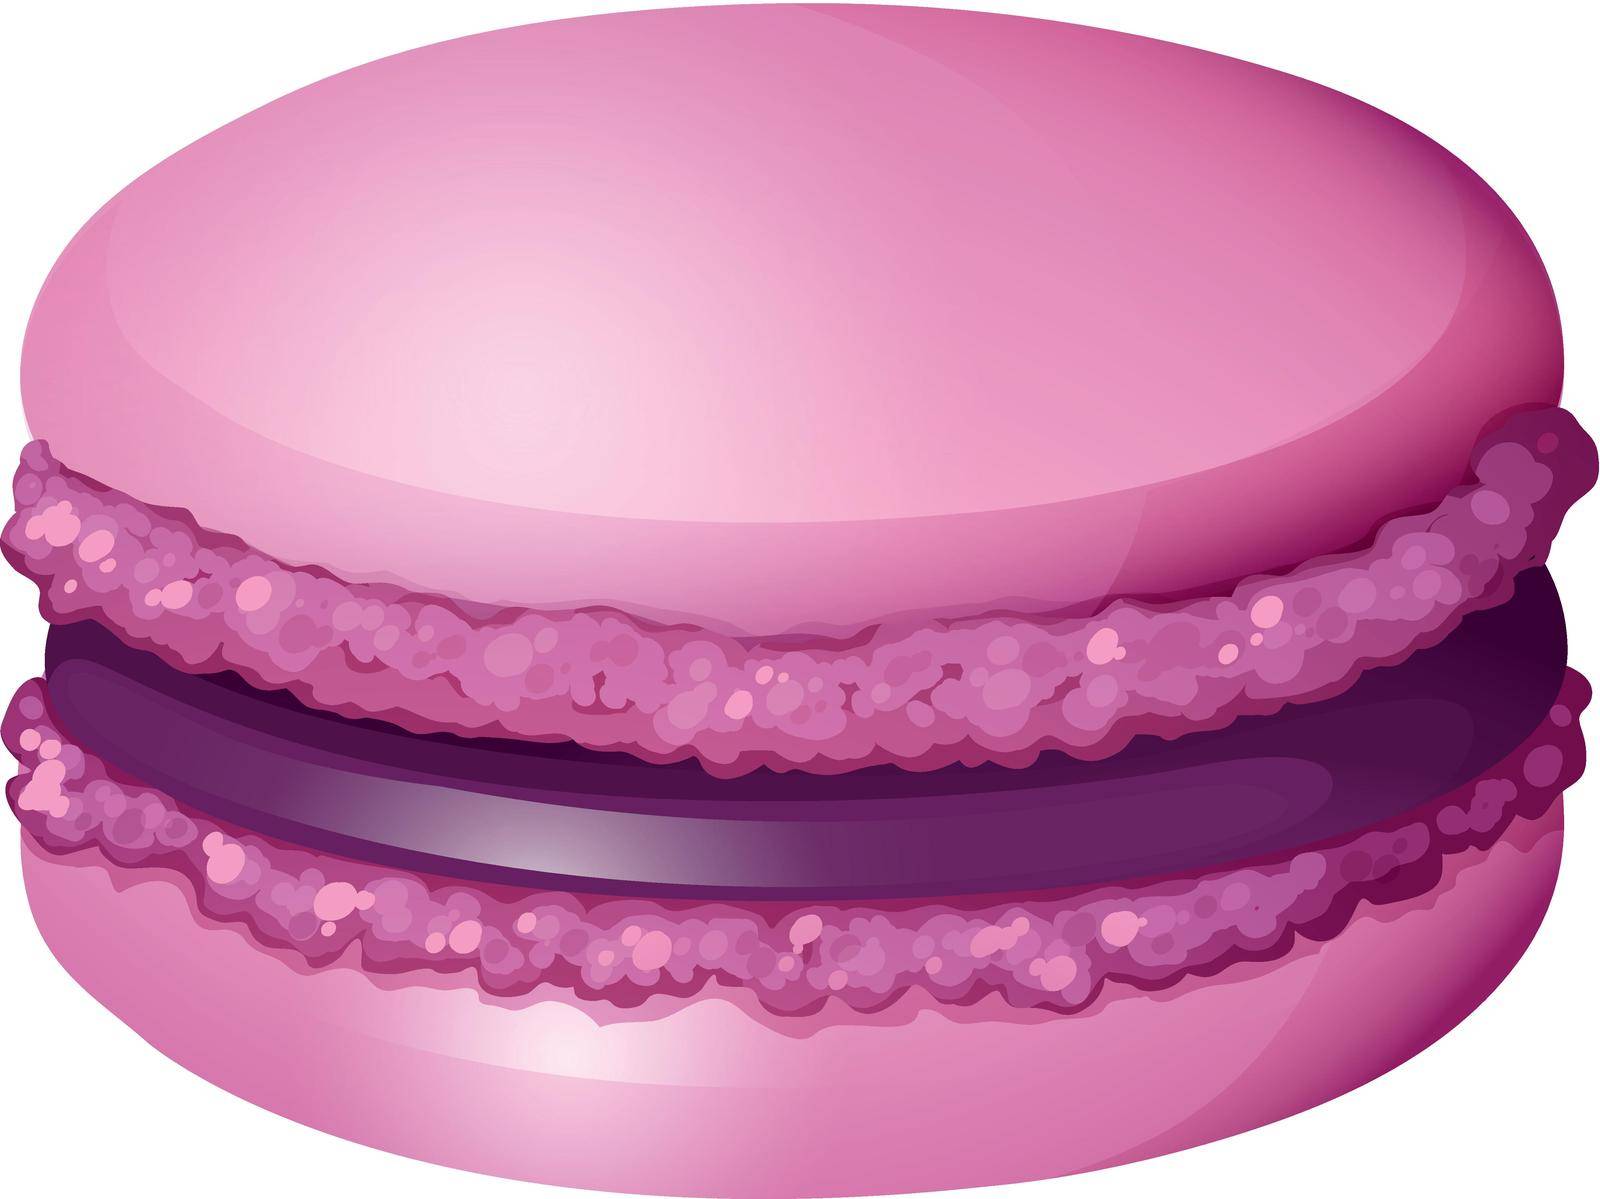 Purple color macaron alone by iimages